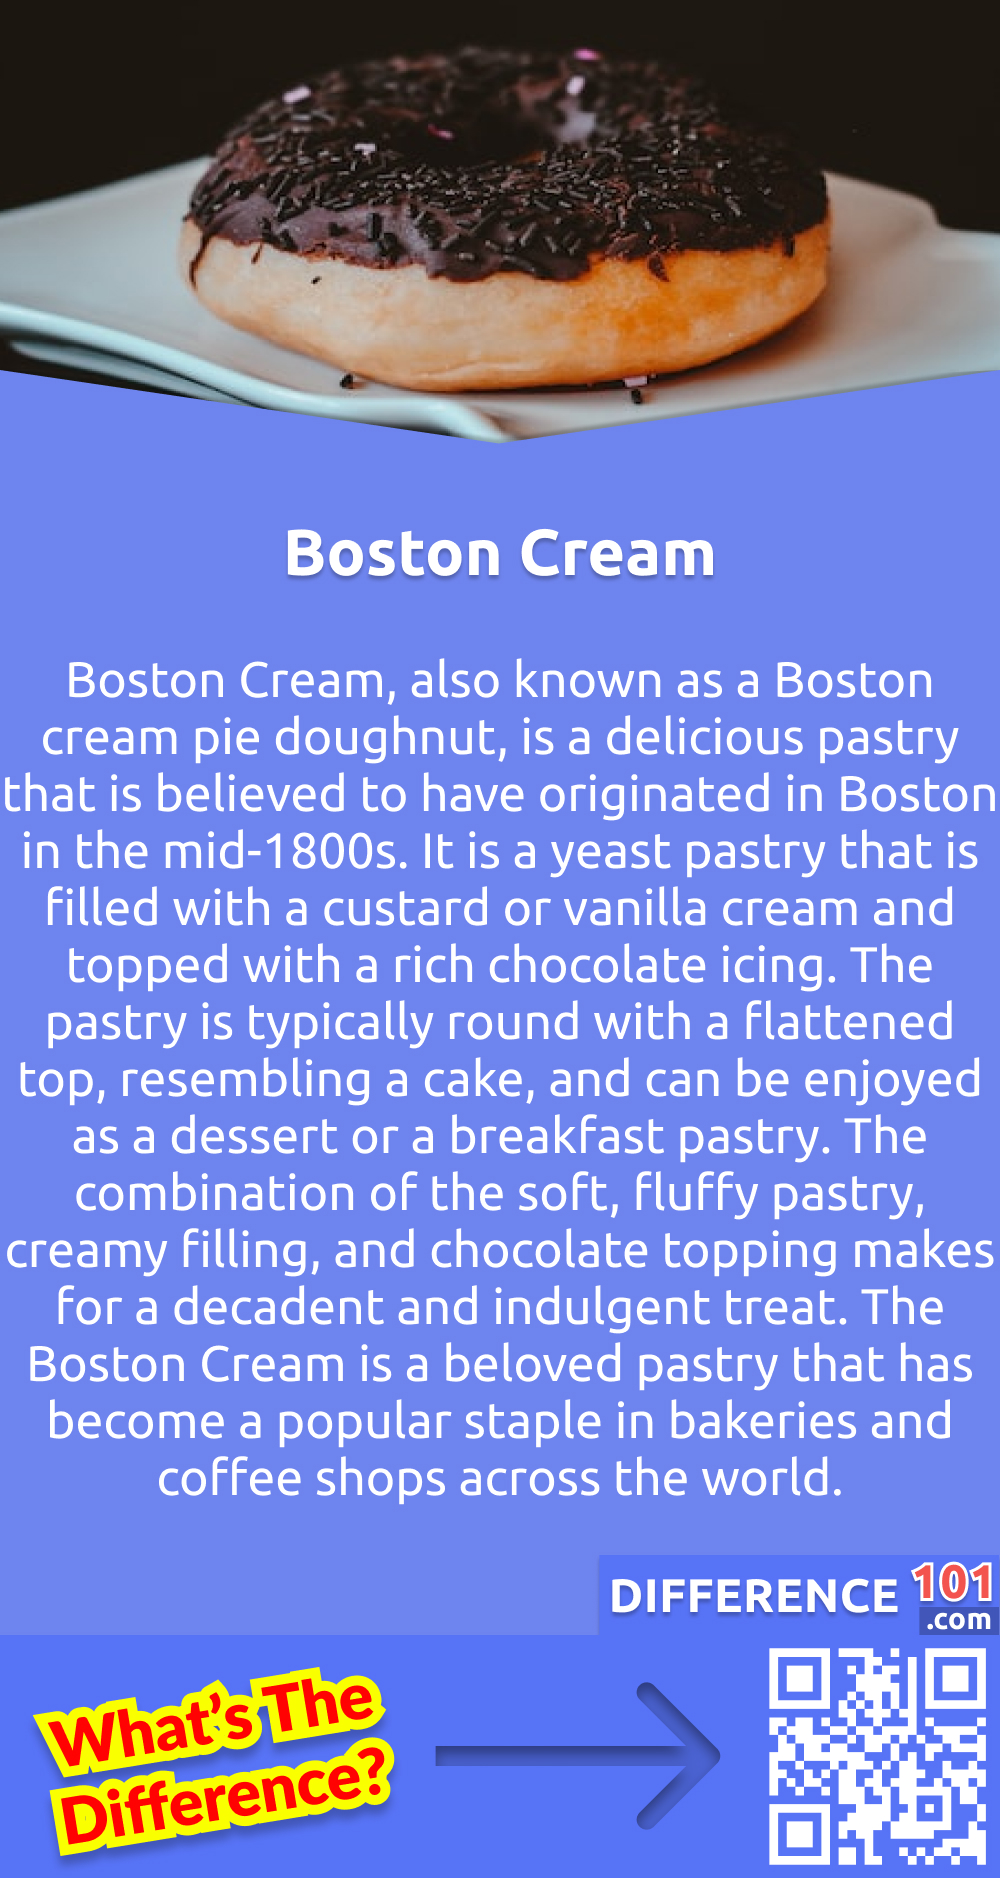 What Is Boston Cream? Boston Cream, also known as a Boston cream pie doughnut, is a delicious pastry that is believed to have originated in Boston in the mid-1800s. It is a yeast pastry that is filled with a custard or vanilla cream and topped with a rich chocolate icing. The pastry is typically round with a flattened top, resembling a cake, and can be enjoyed as a dessert or a breakfast pastry. The combination of the soft, fluffy pastry, creamy filling, and chocolate topping makes for a decadent and indulgent treat. The Boston Cream is a beloved pastry that has become a popular staple in bakeries and coffee shops across the world.